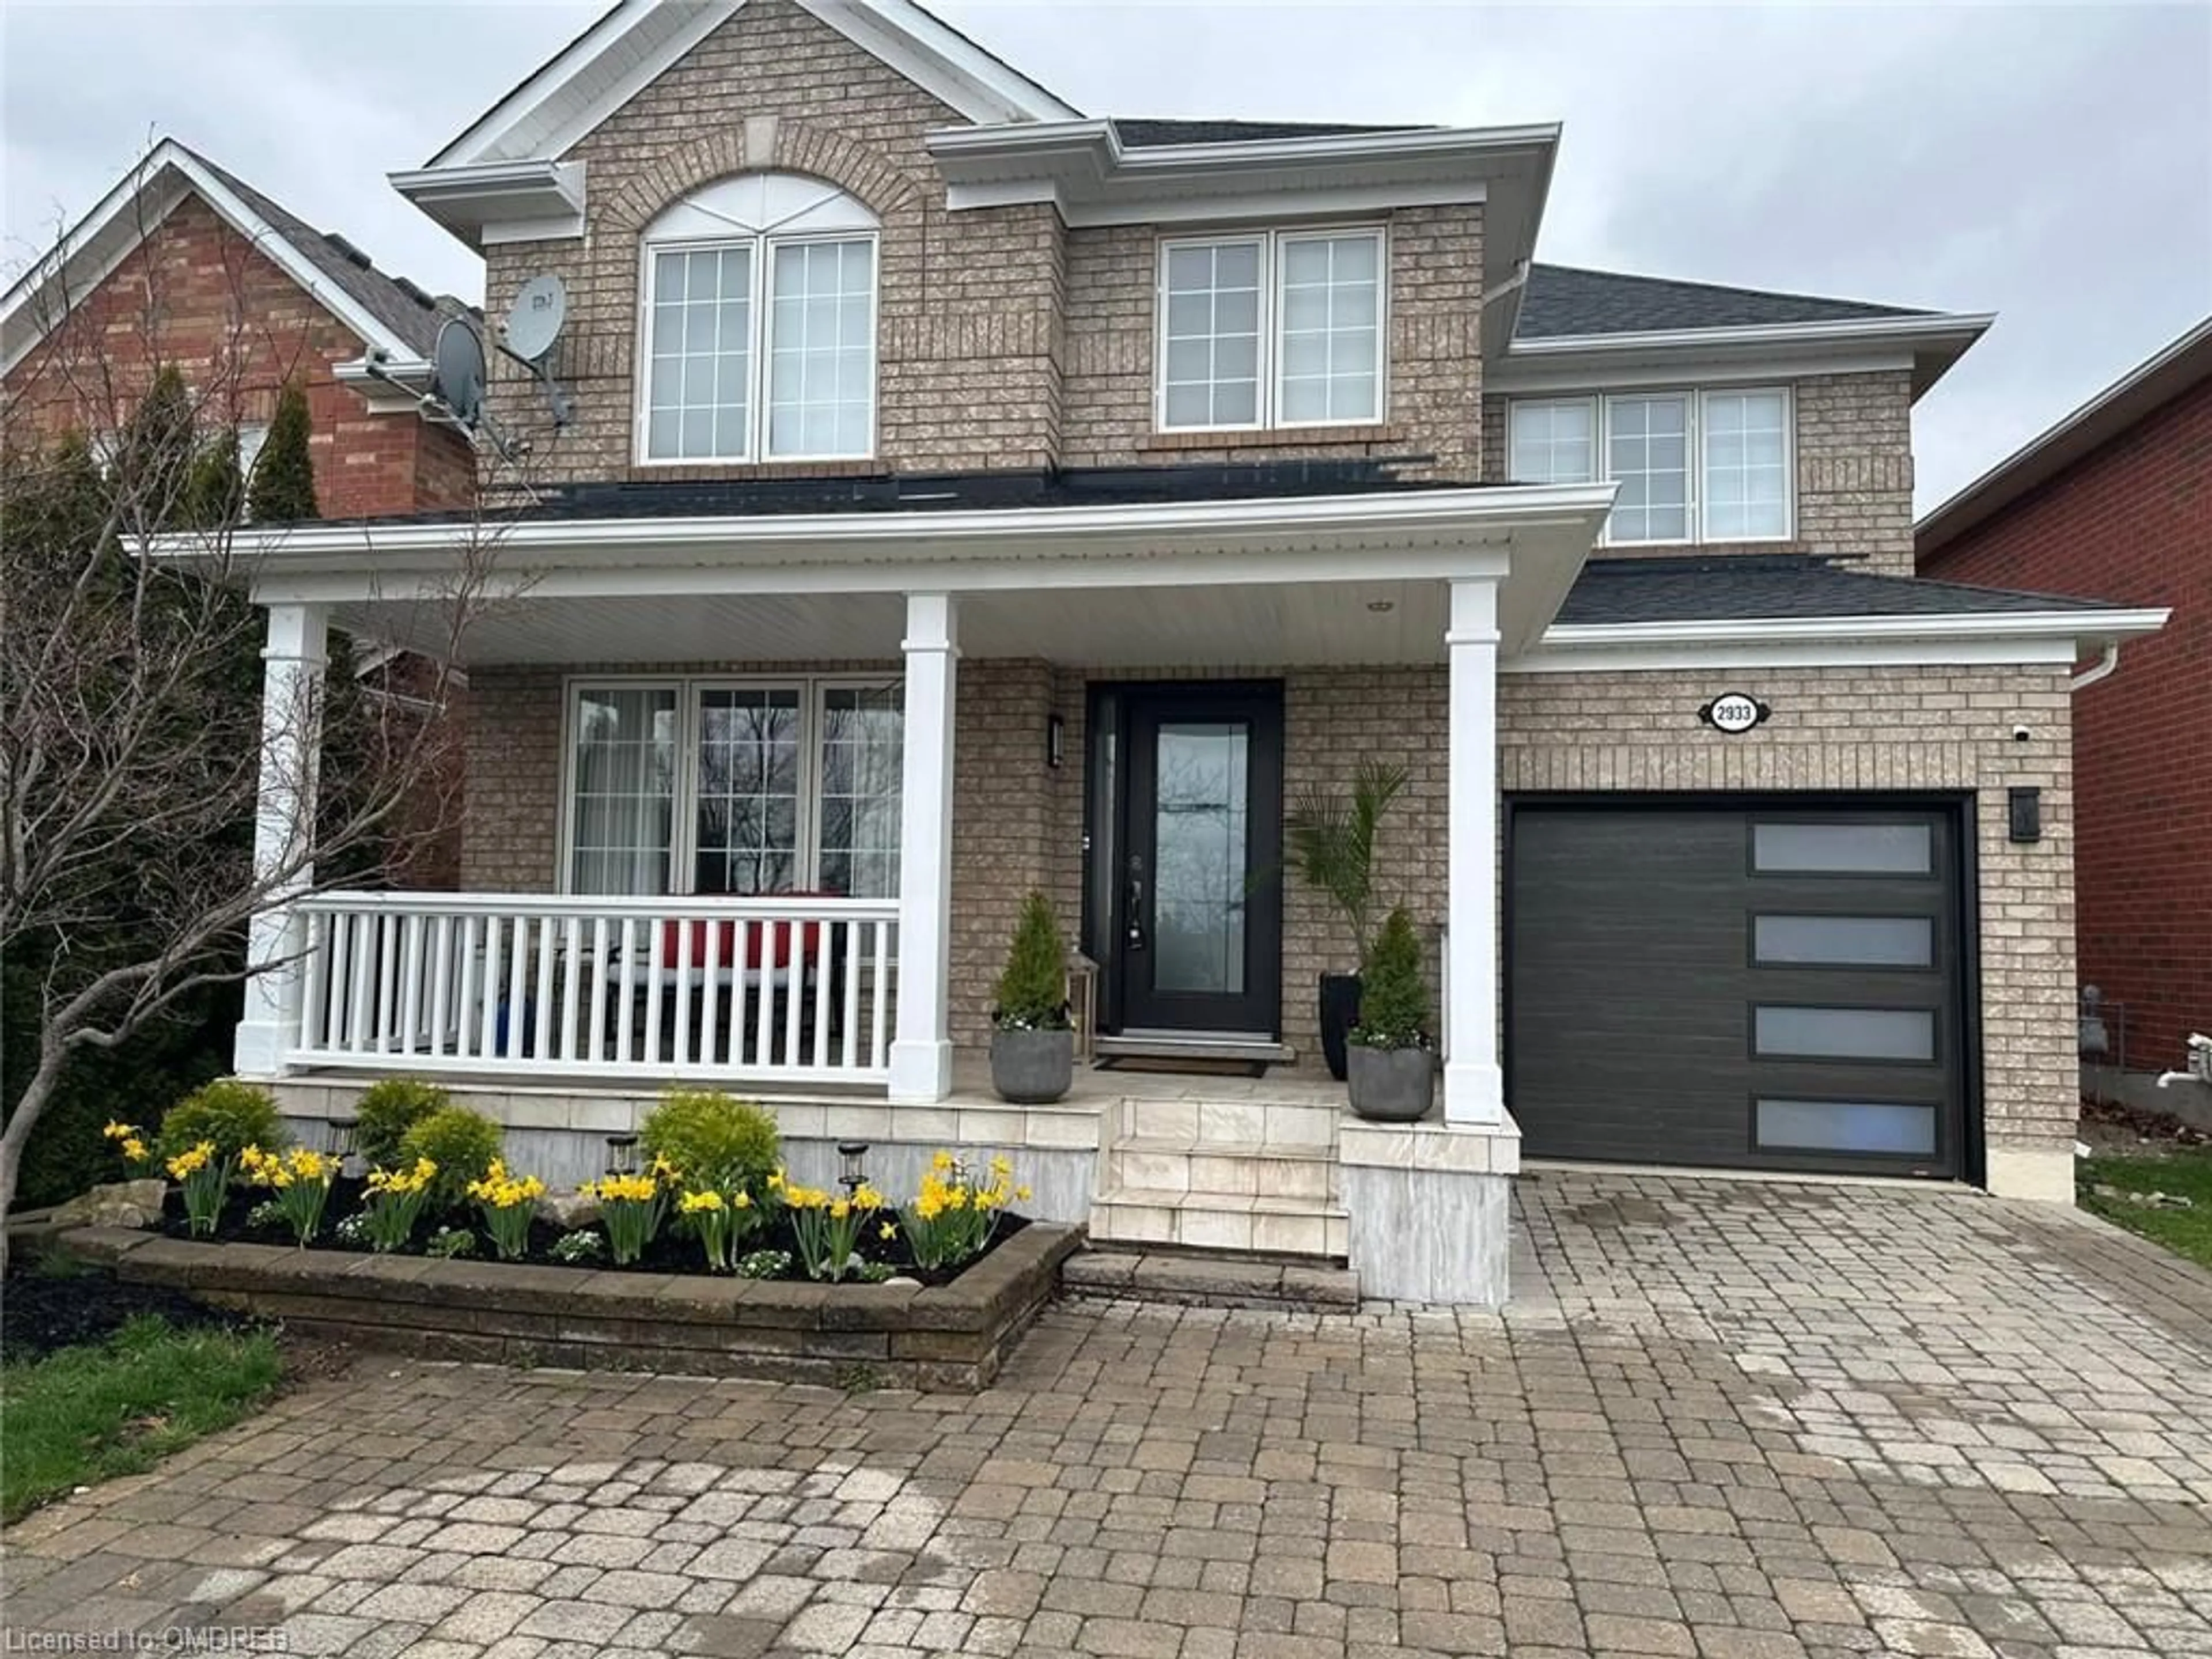 Home with brick exterior material for 2933 Westoak Trails Blvd, Oakville Ontario L6M 4V2